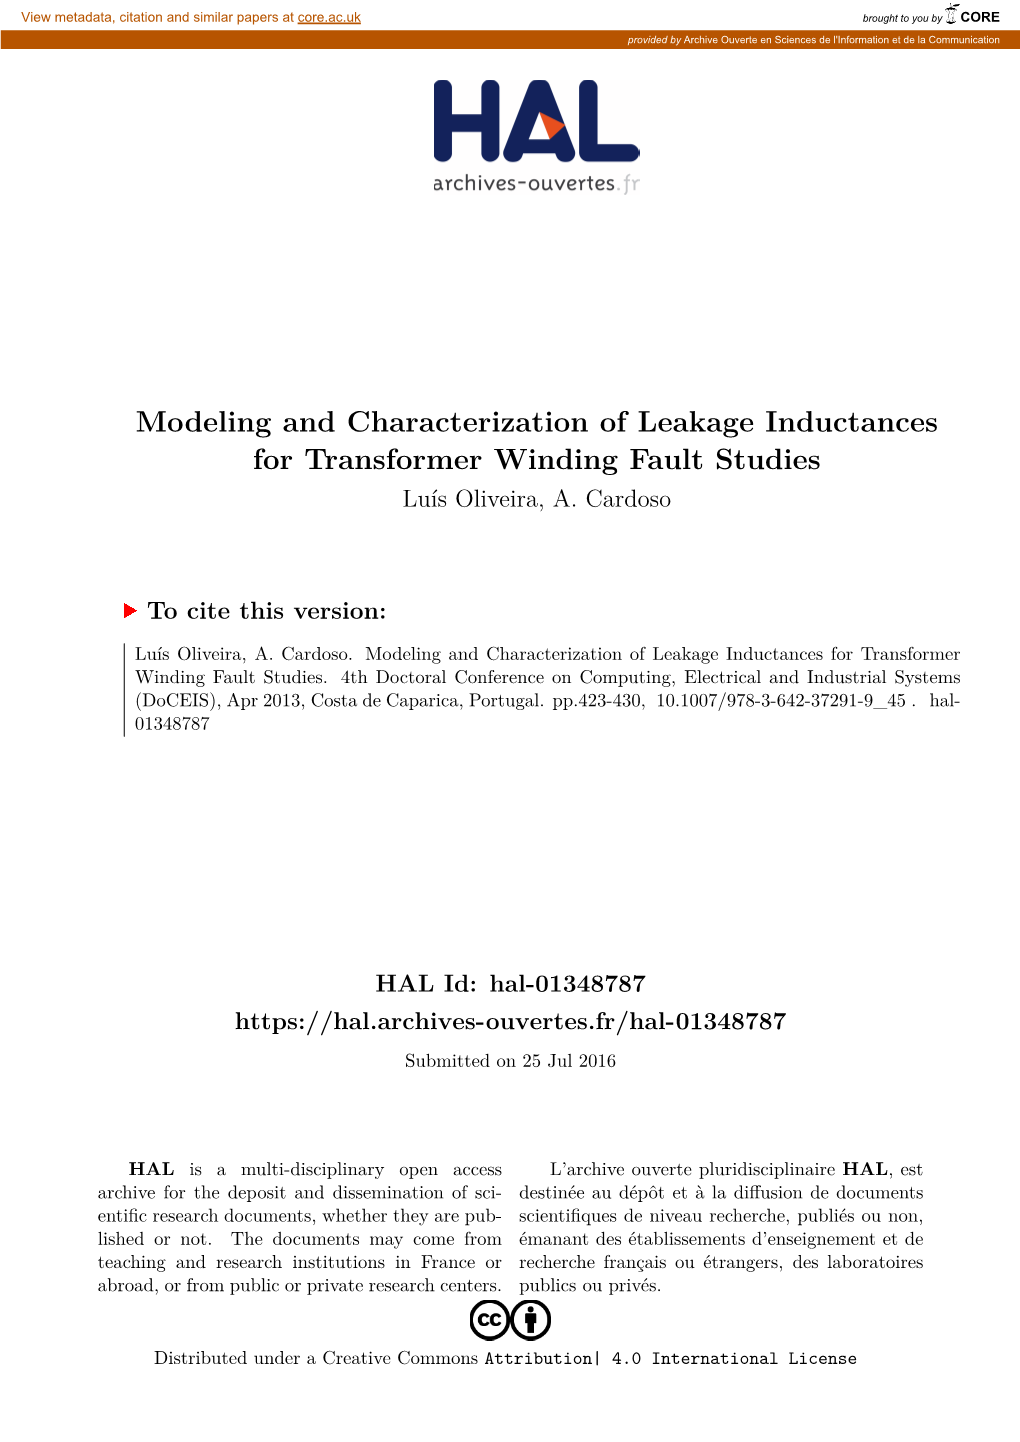 Modeling and Characterization of Leakage Inductances for Transformer Winding Fault Studies Luís Oliveira, A